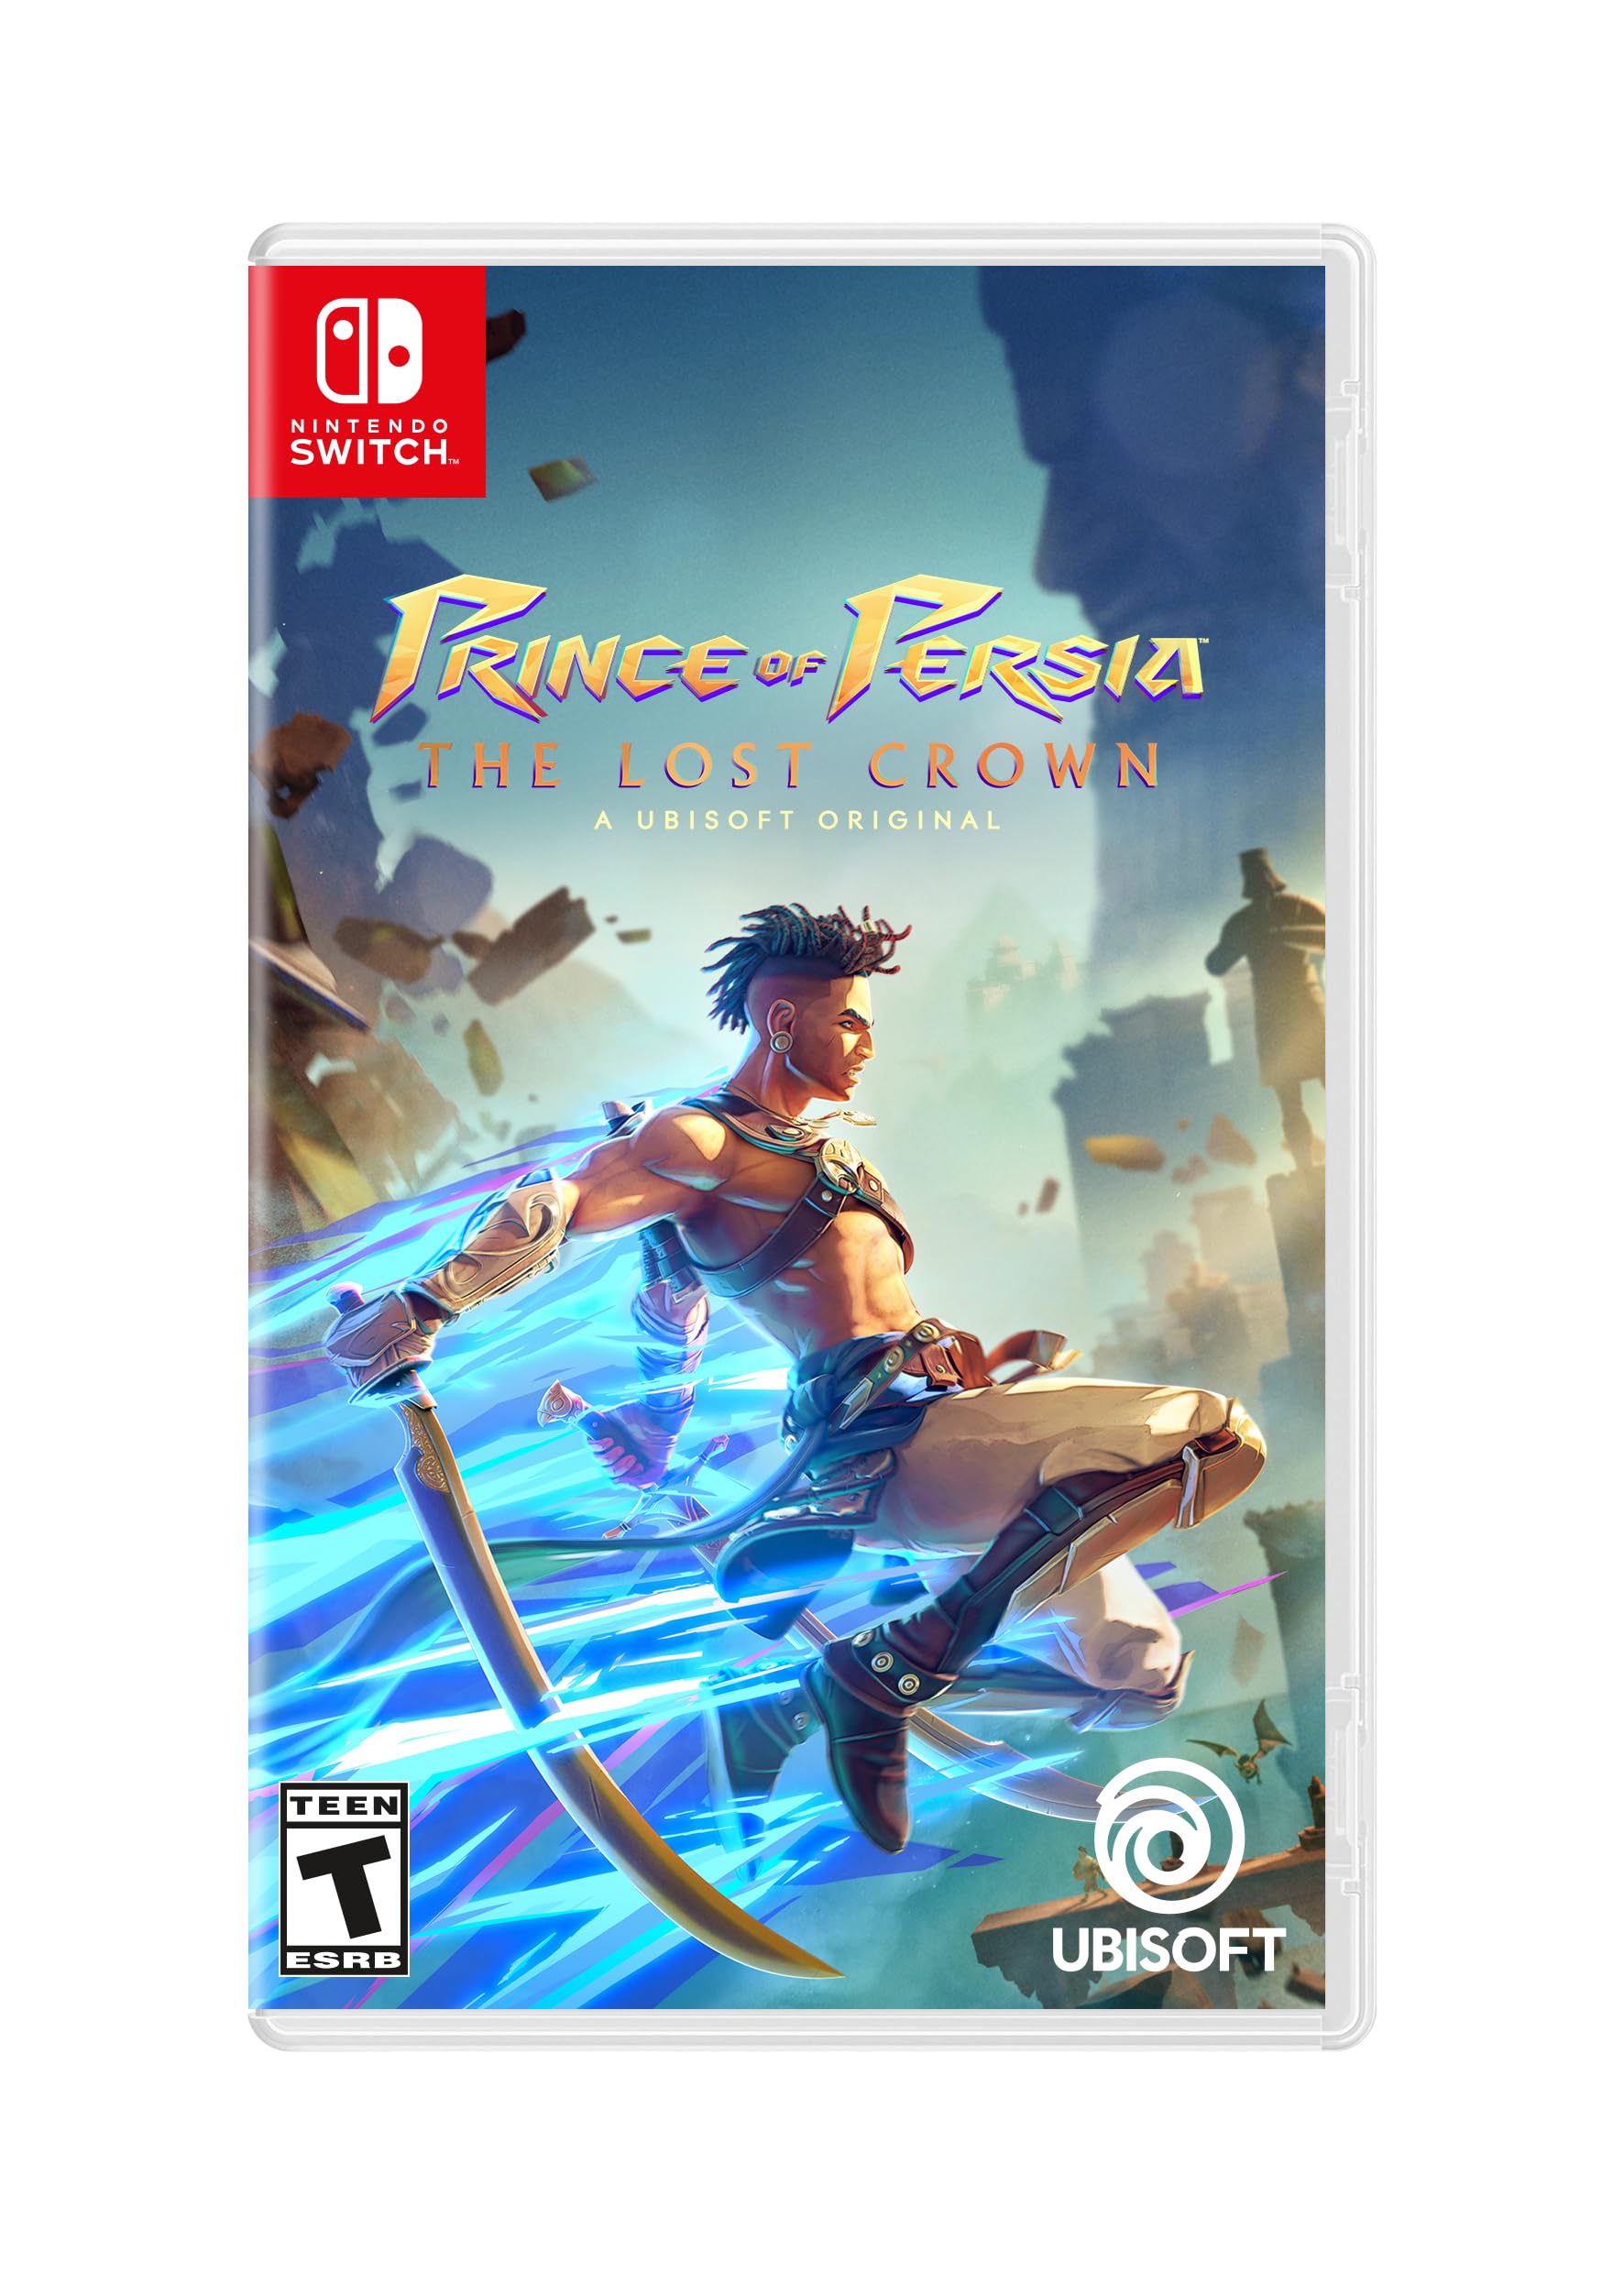 Prince of Persia™: The Lost Crown - Standard Edition, Nintendo Switch $32 - Amazon